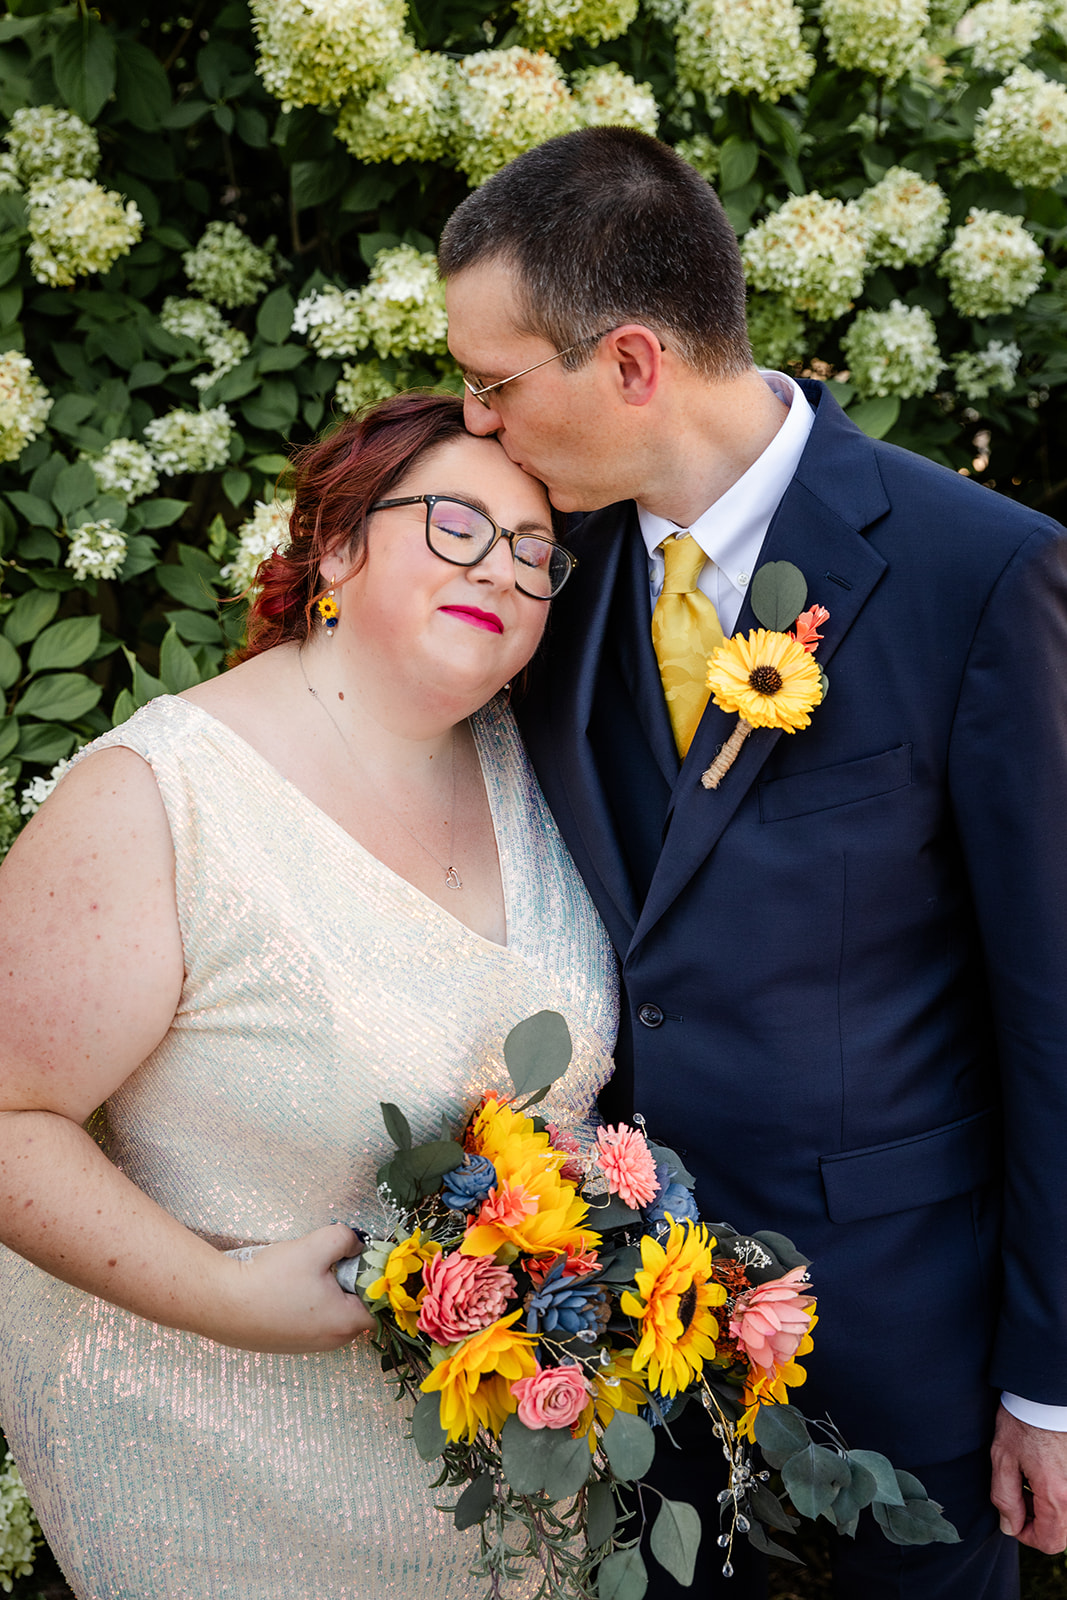 Groom kissing his bride in front of flowers